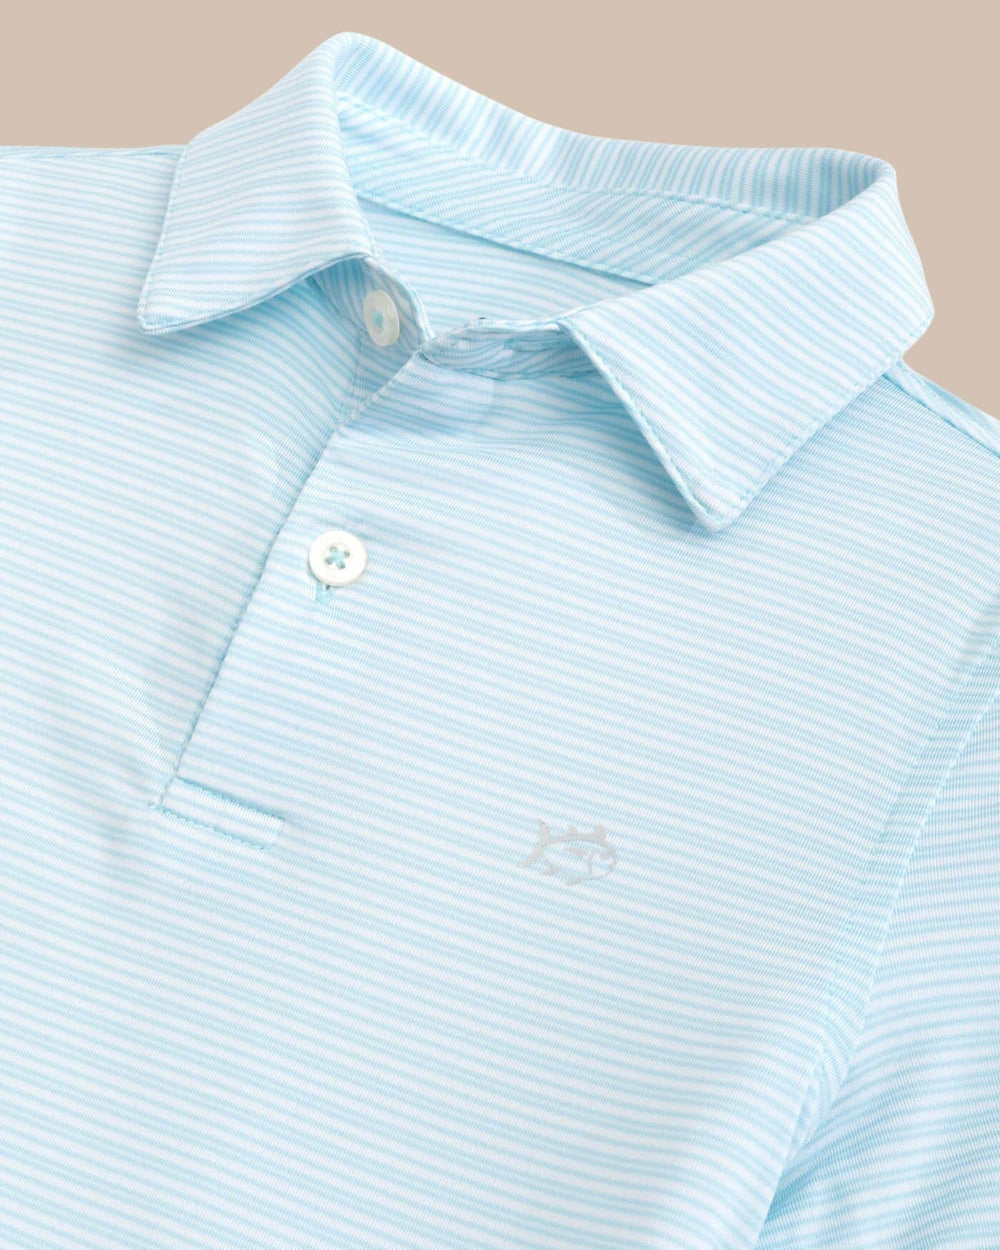 The detail view of the Southern Tide Boys Driver Camden Stripe Performance Polo by Southern Tide - Dream Blue